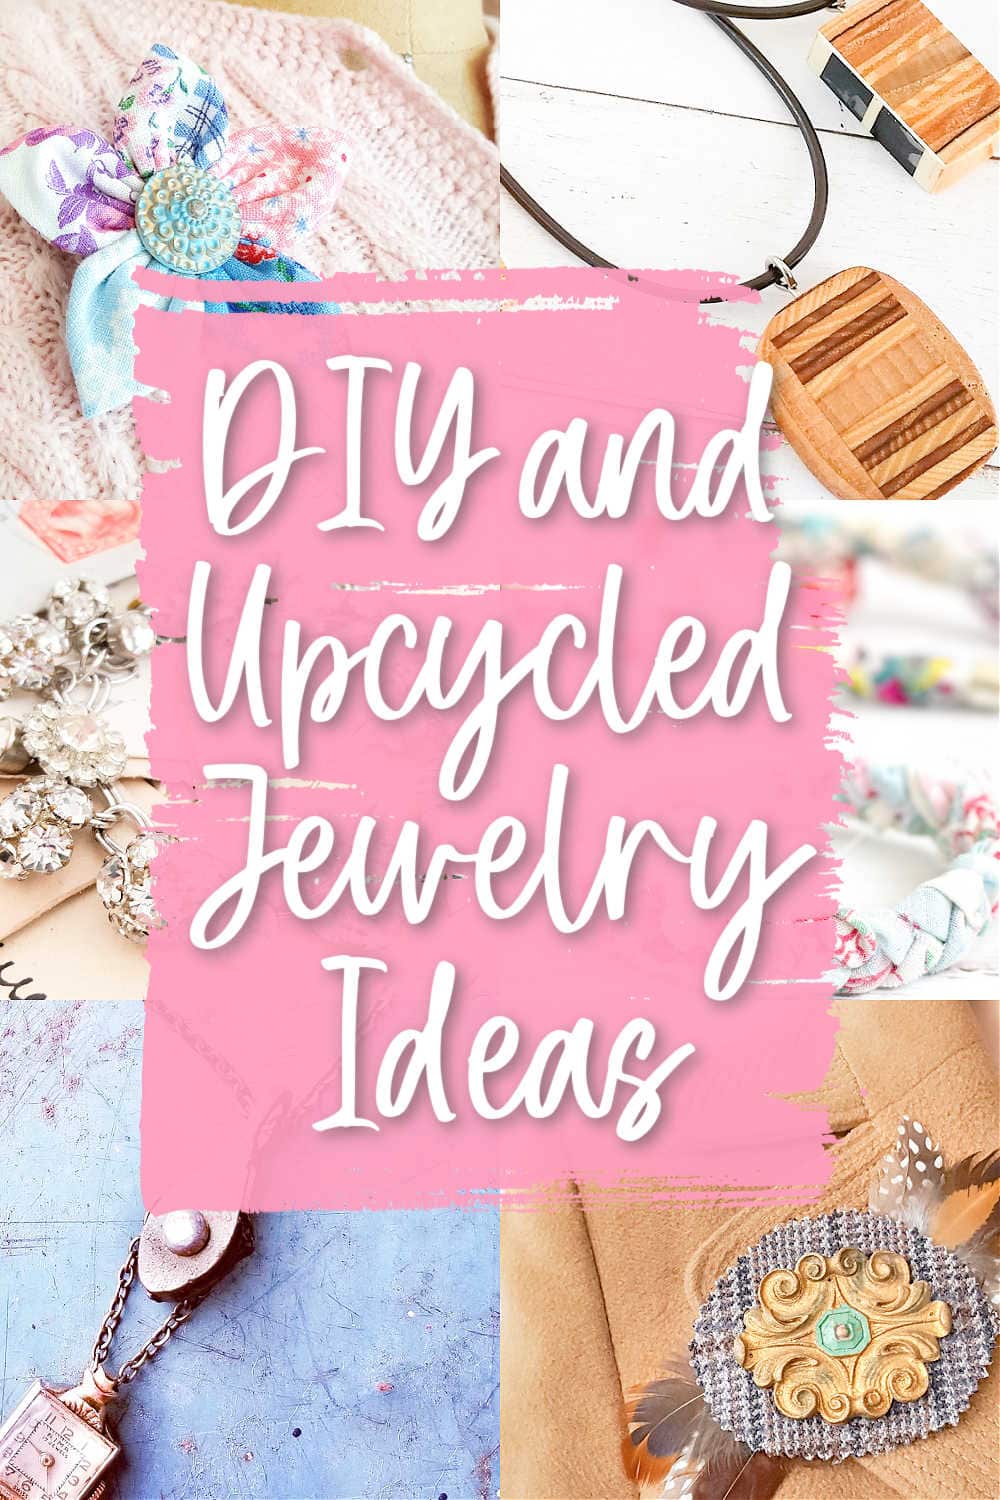 Project ideas for vintage jewelry or broken jewelry